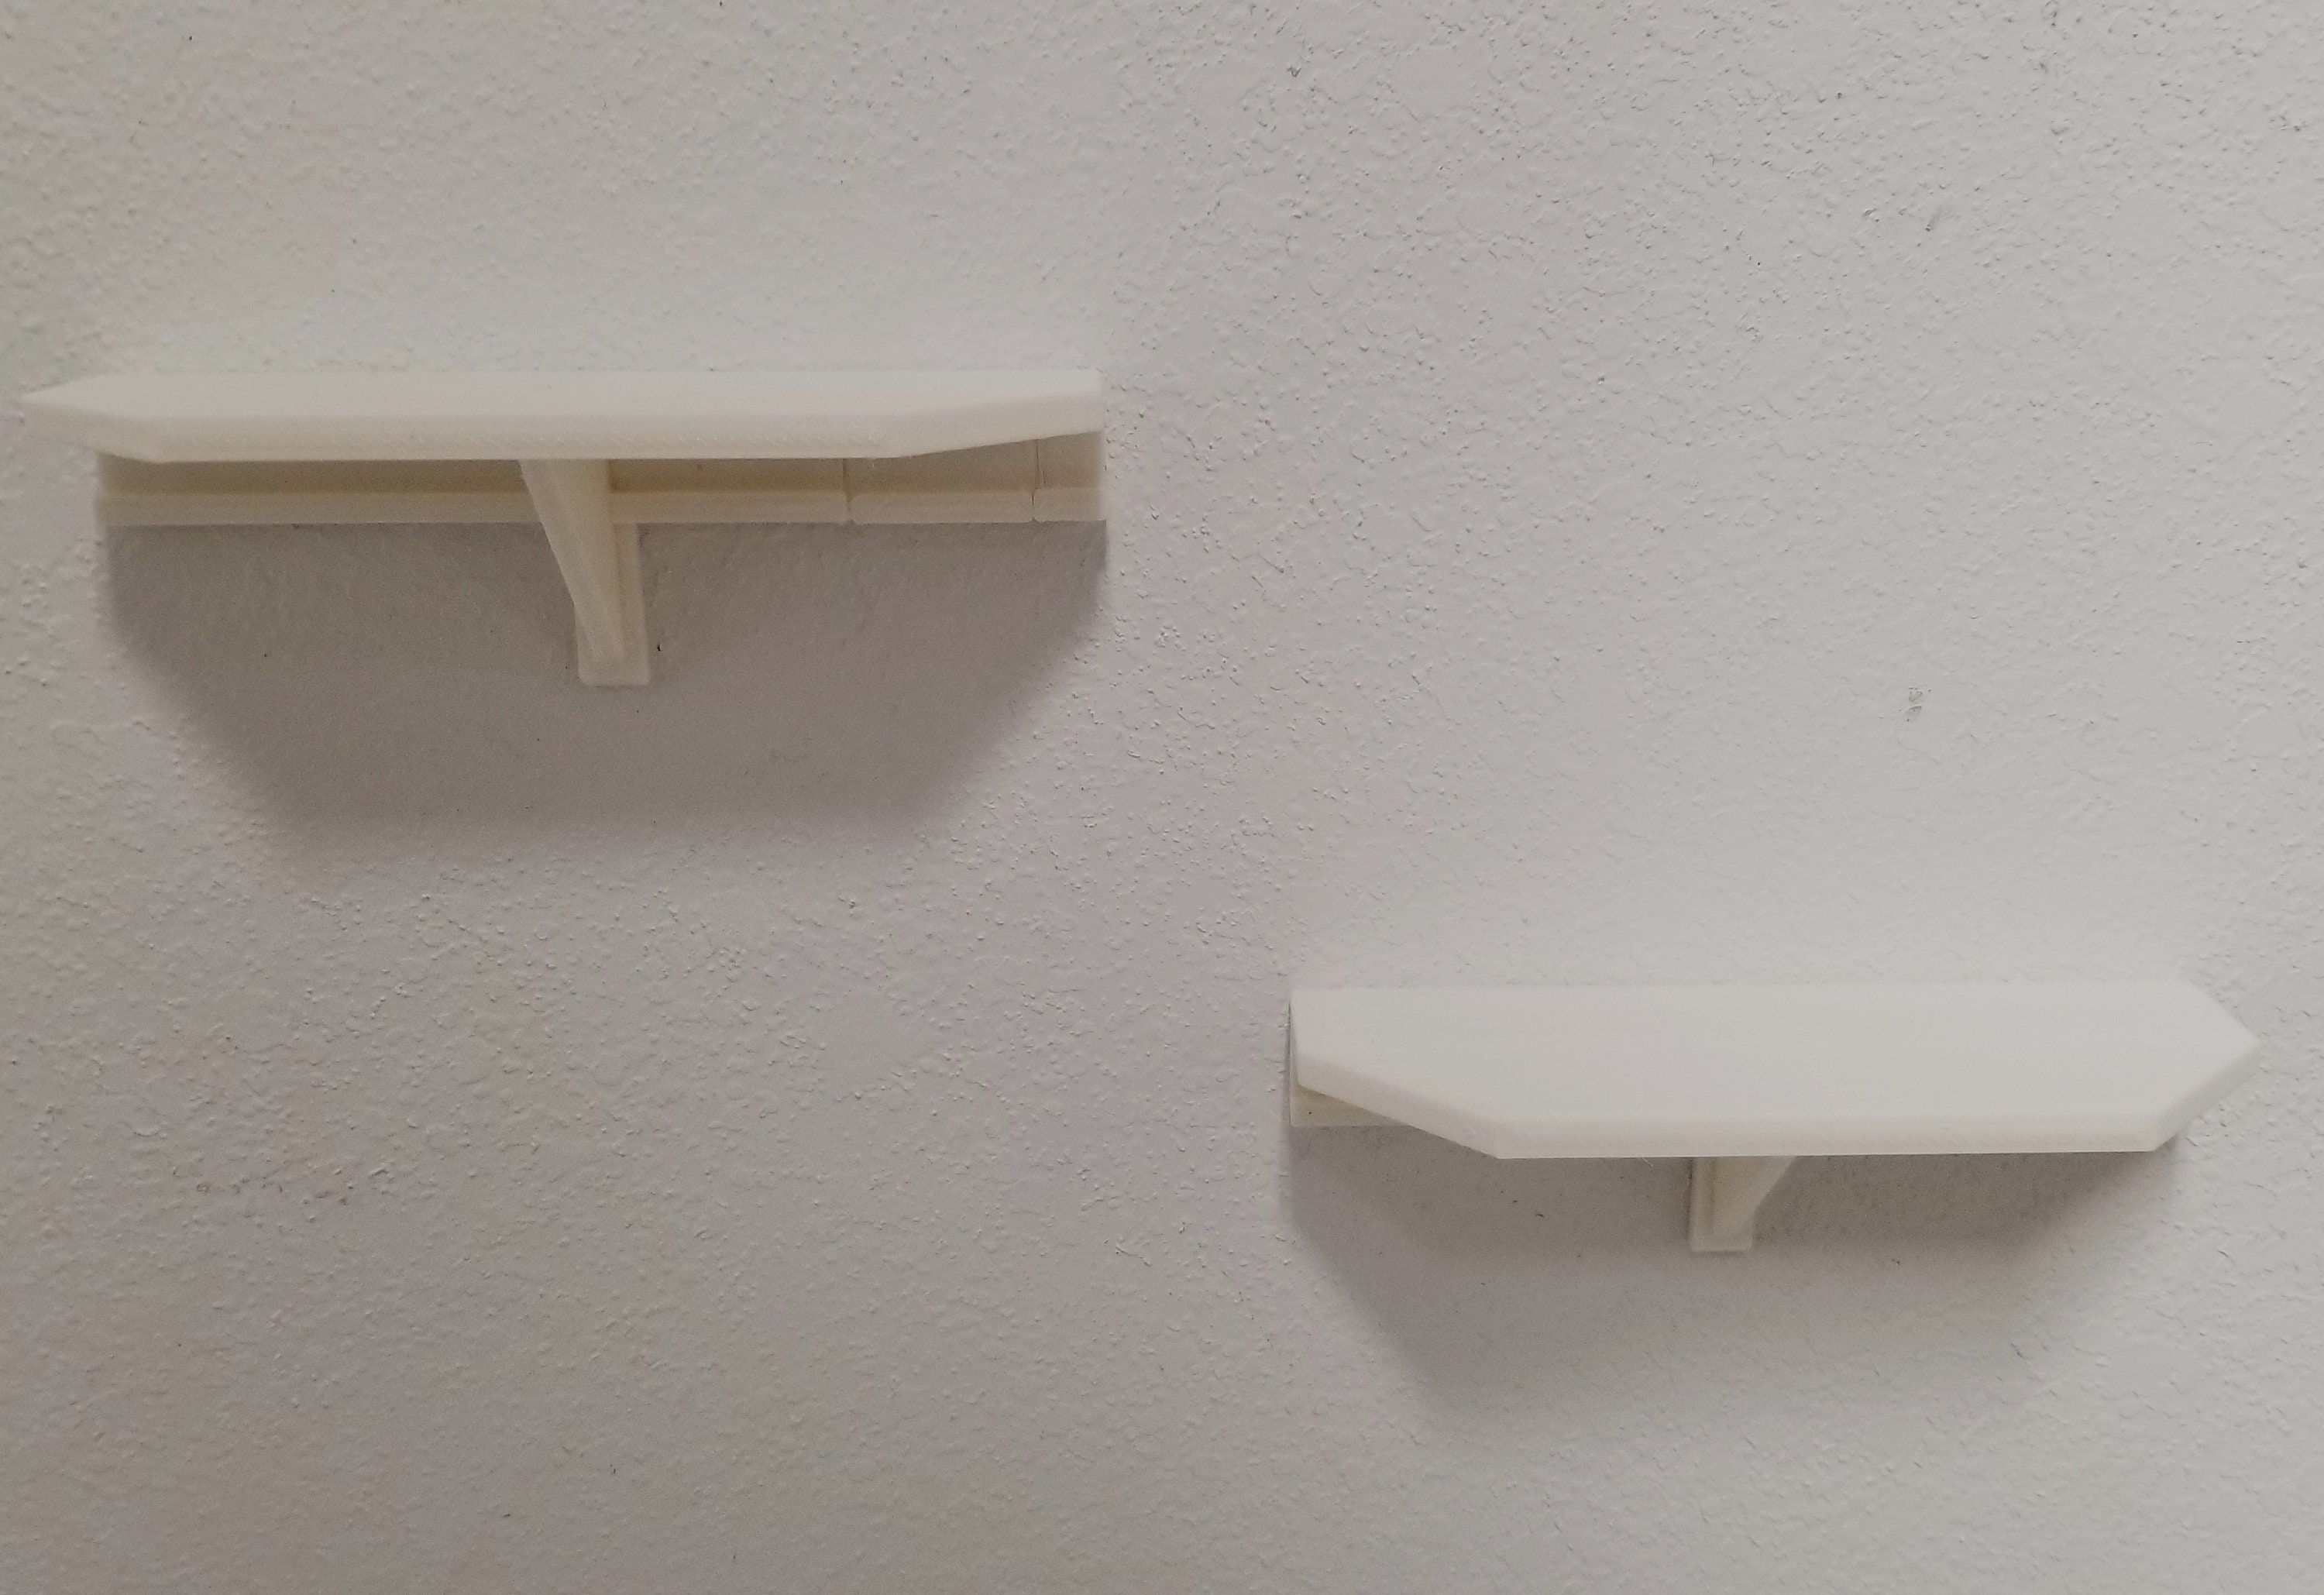 12 X 2 Inch White Wall Shelf Free Shipping Uses 3M Command Strips for Easy  Mounting and Damage Free Removal No Nails or Screws Required 